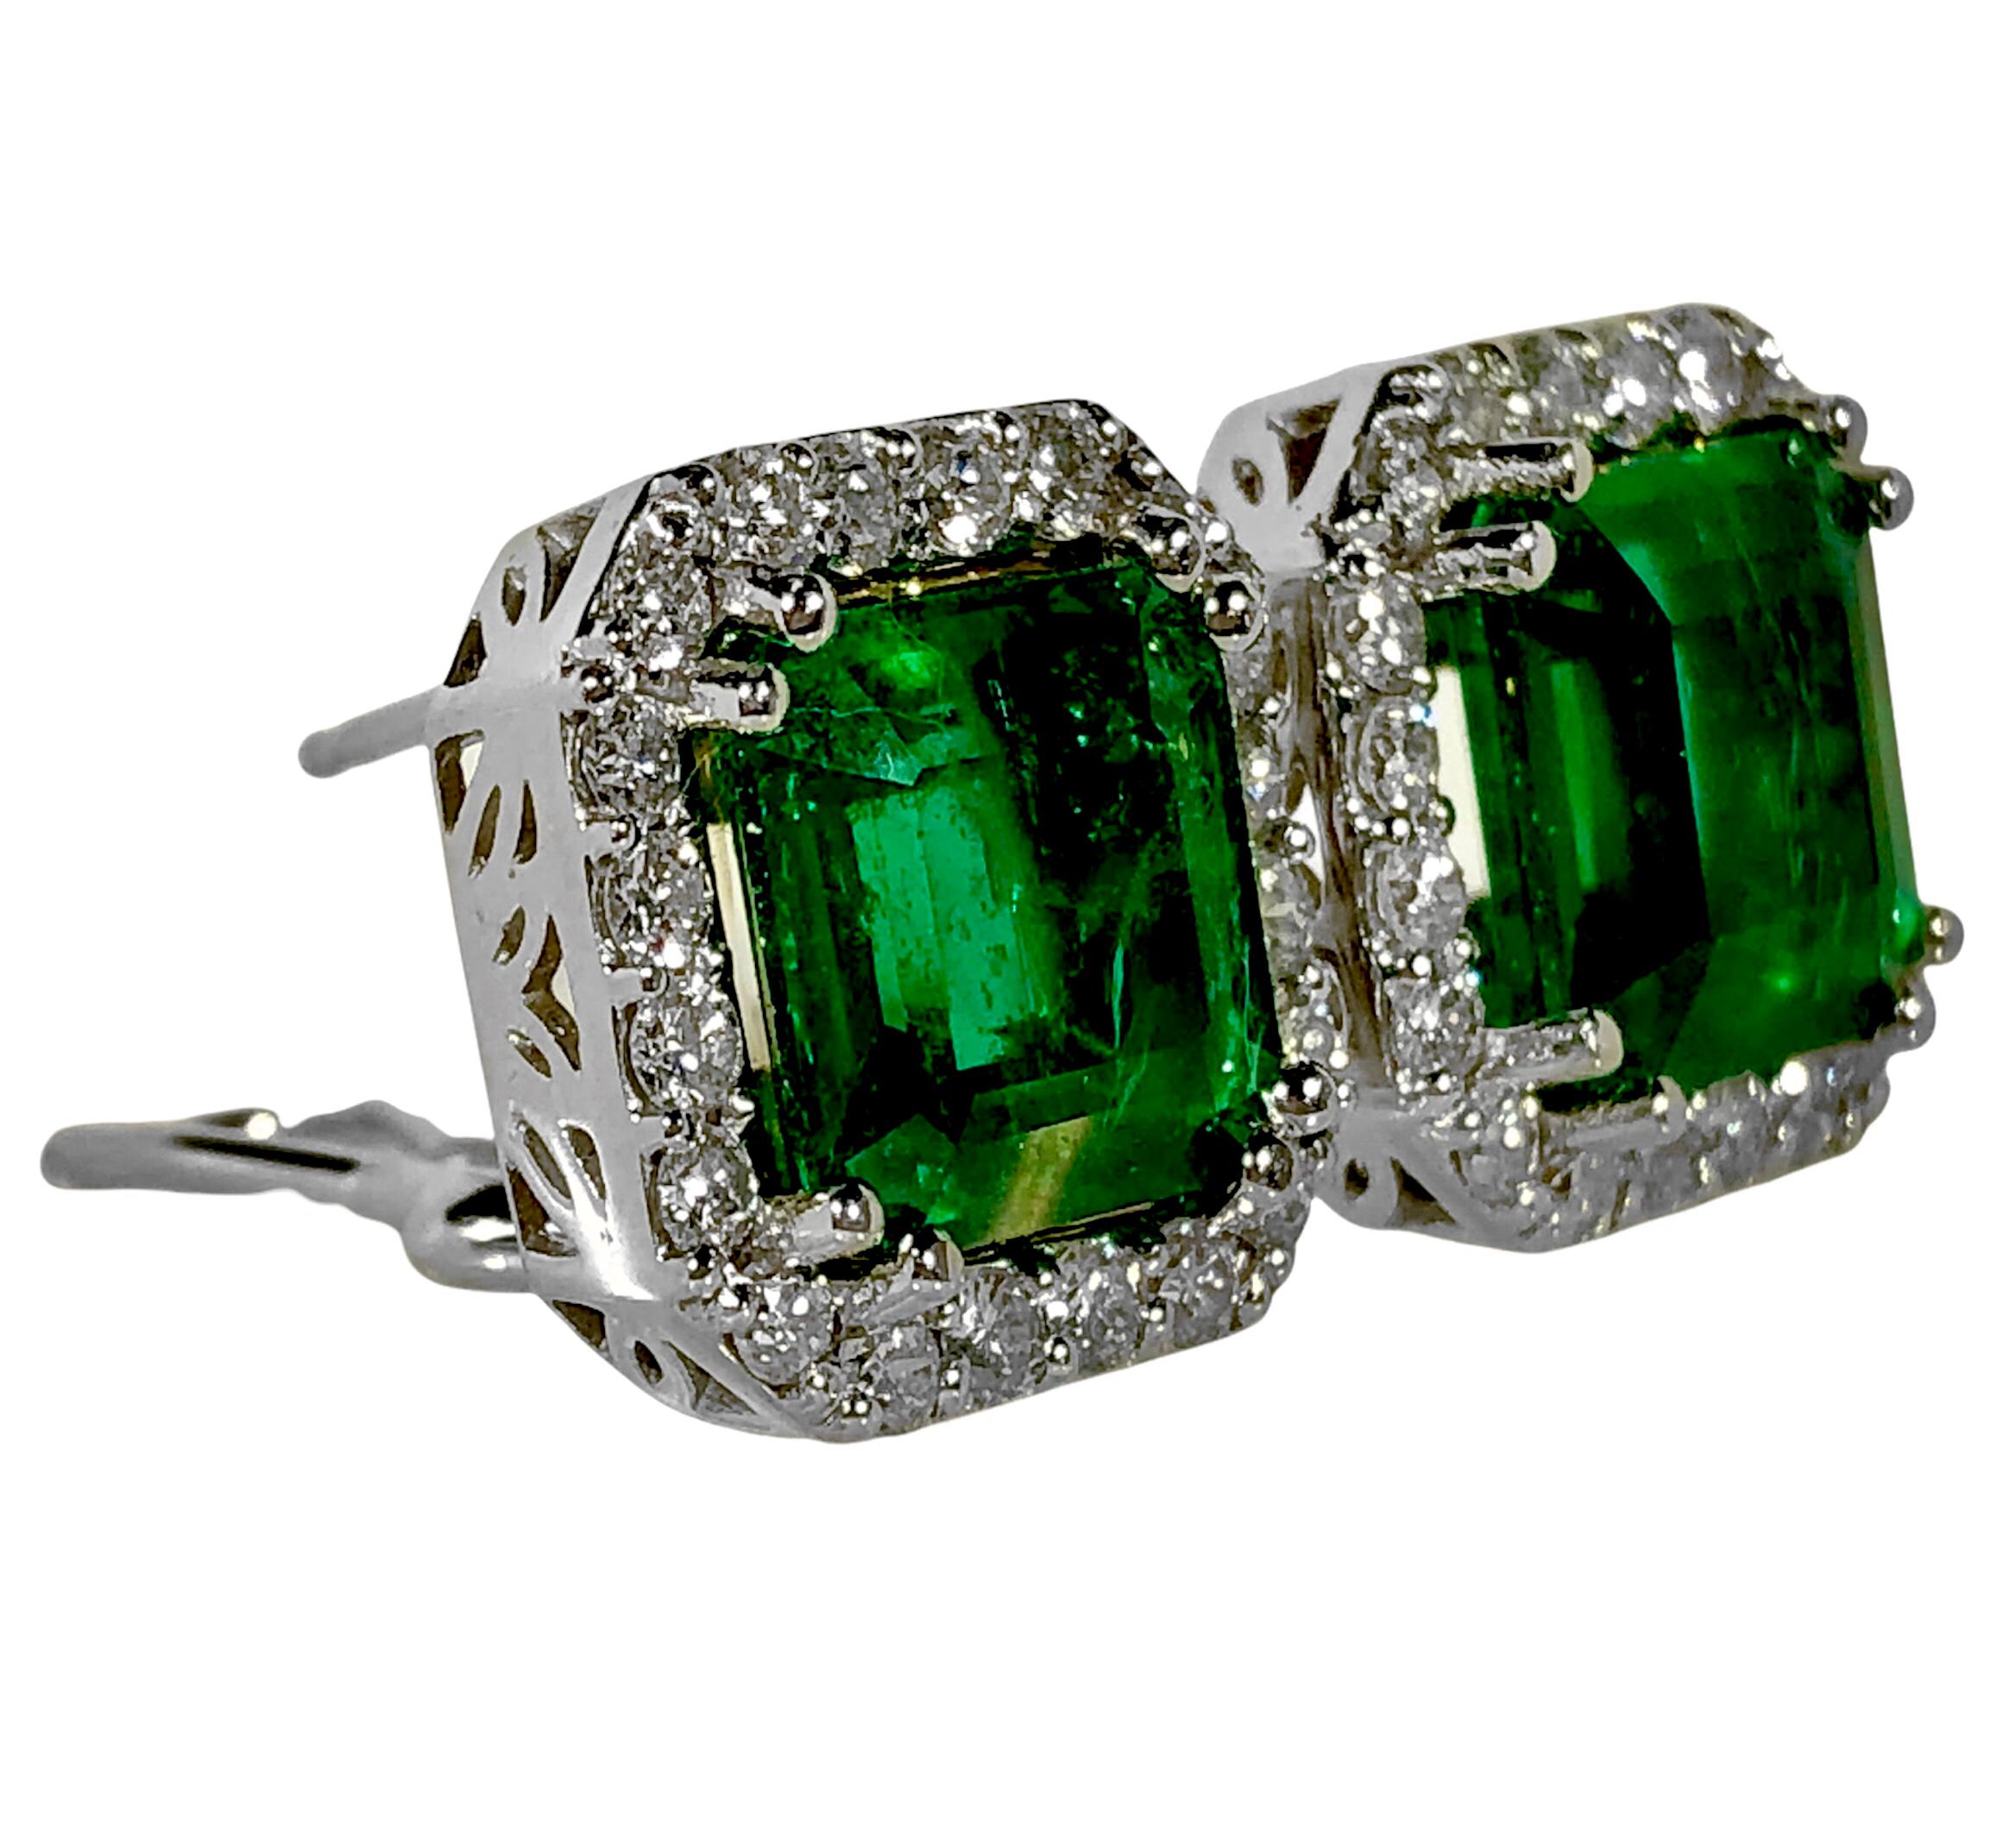 A pair of 14K white gold earrings set with two Zambian emerald cut emeralds weighing a total of exactly 7.96 carats. The edges of the earrings are set with a total of 40 round brilliant cut diamonds, weighing a total of approximately 1.50ct of